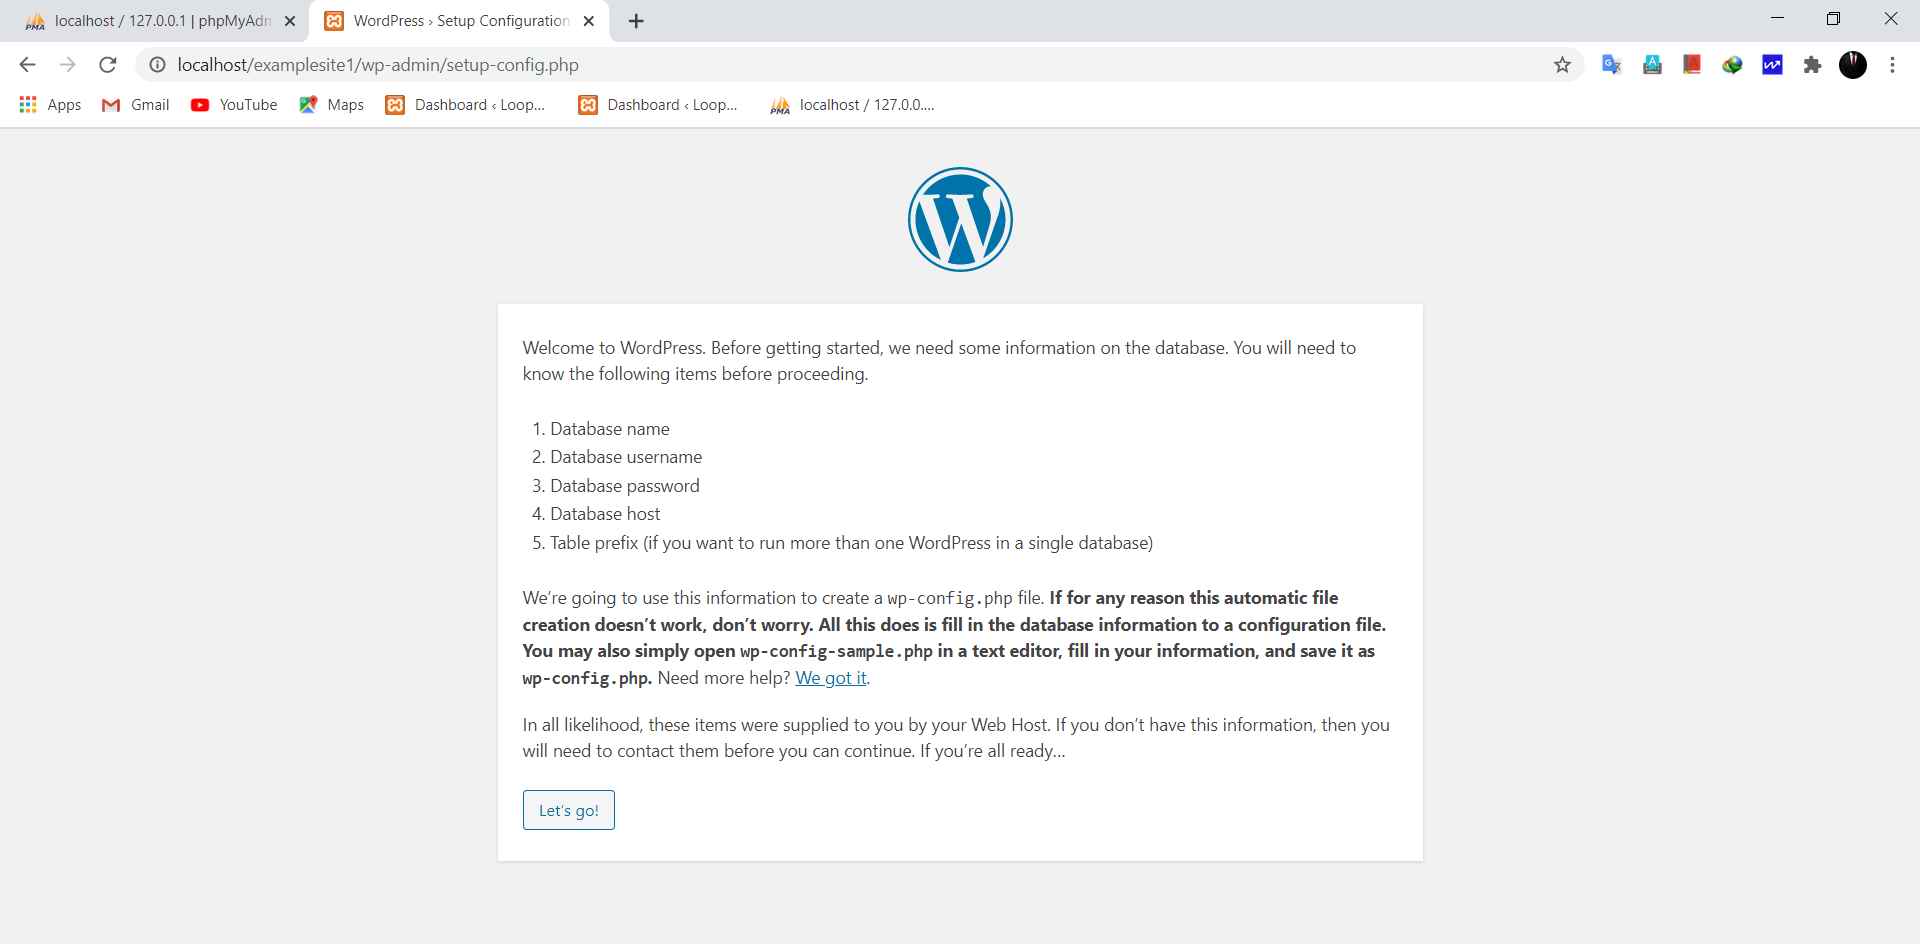 How to install wordpress in local host? Step by step guide.